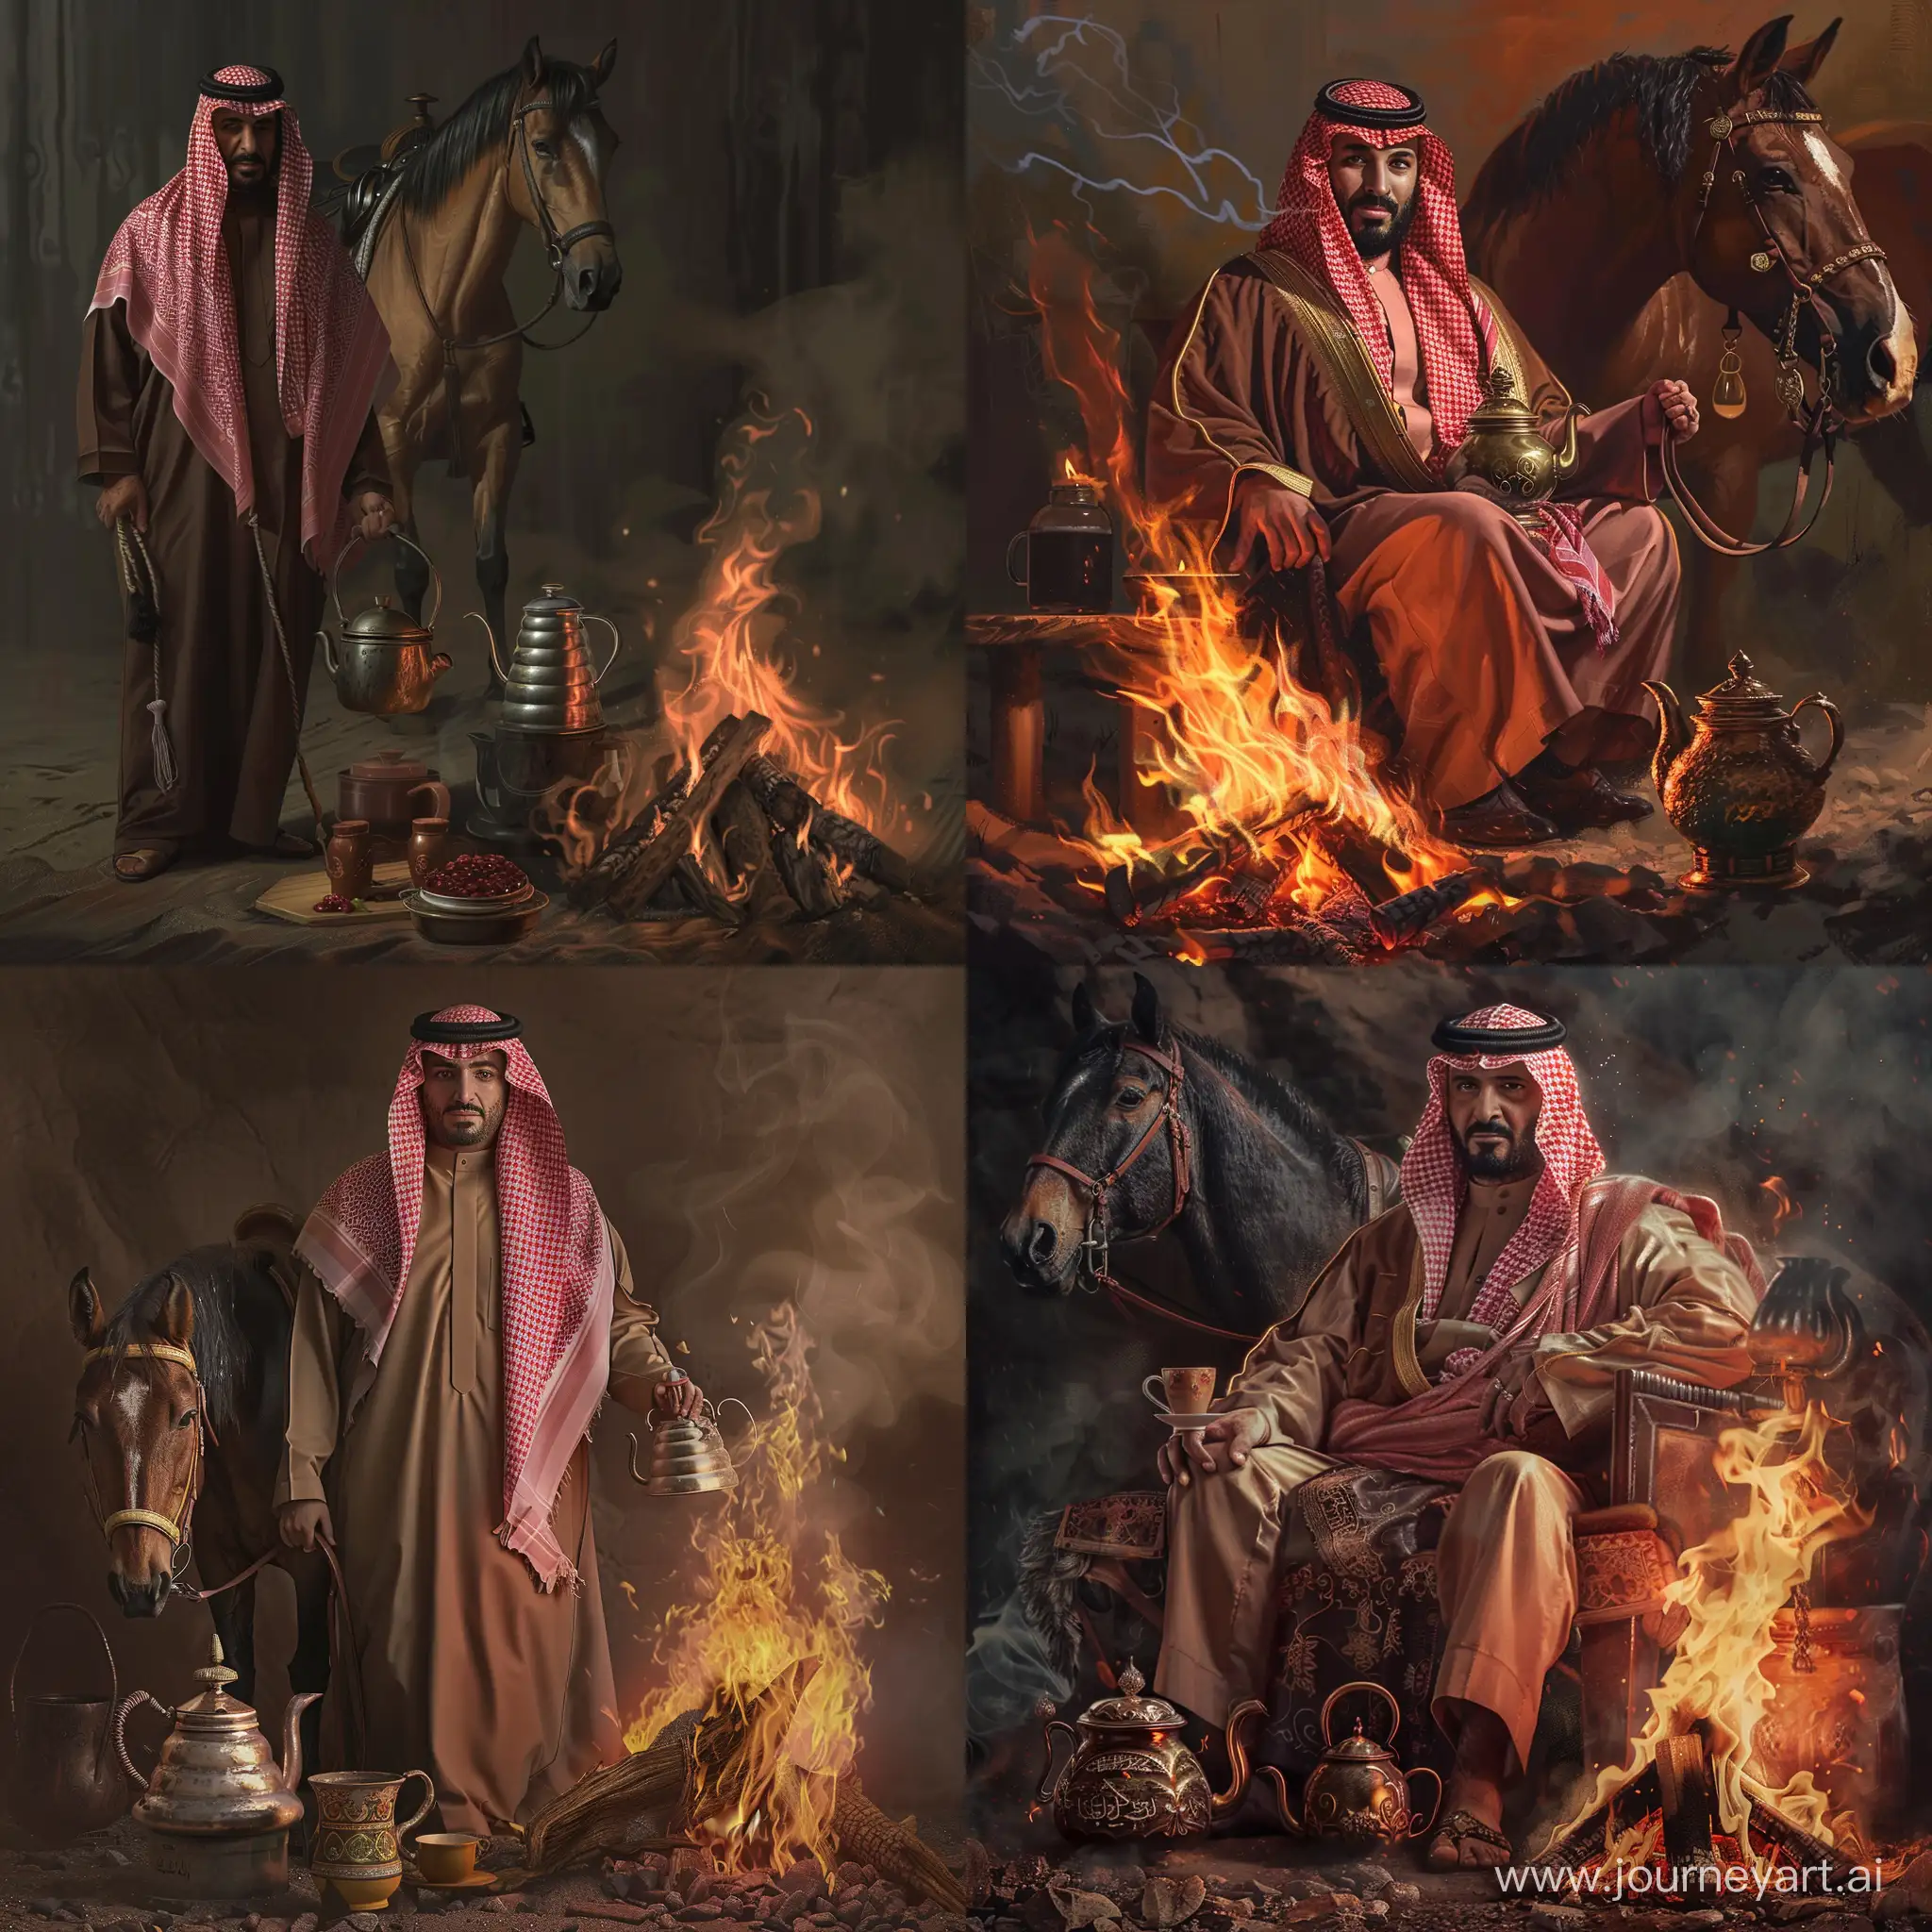 Traditional-Saudi-Man-with-Dallah-and-Tea-Kettle-by-a-Fiery-Horse